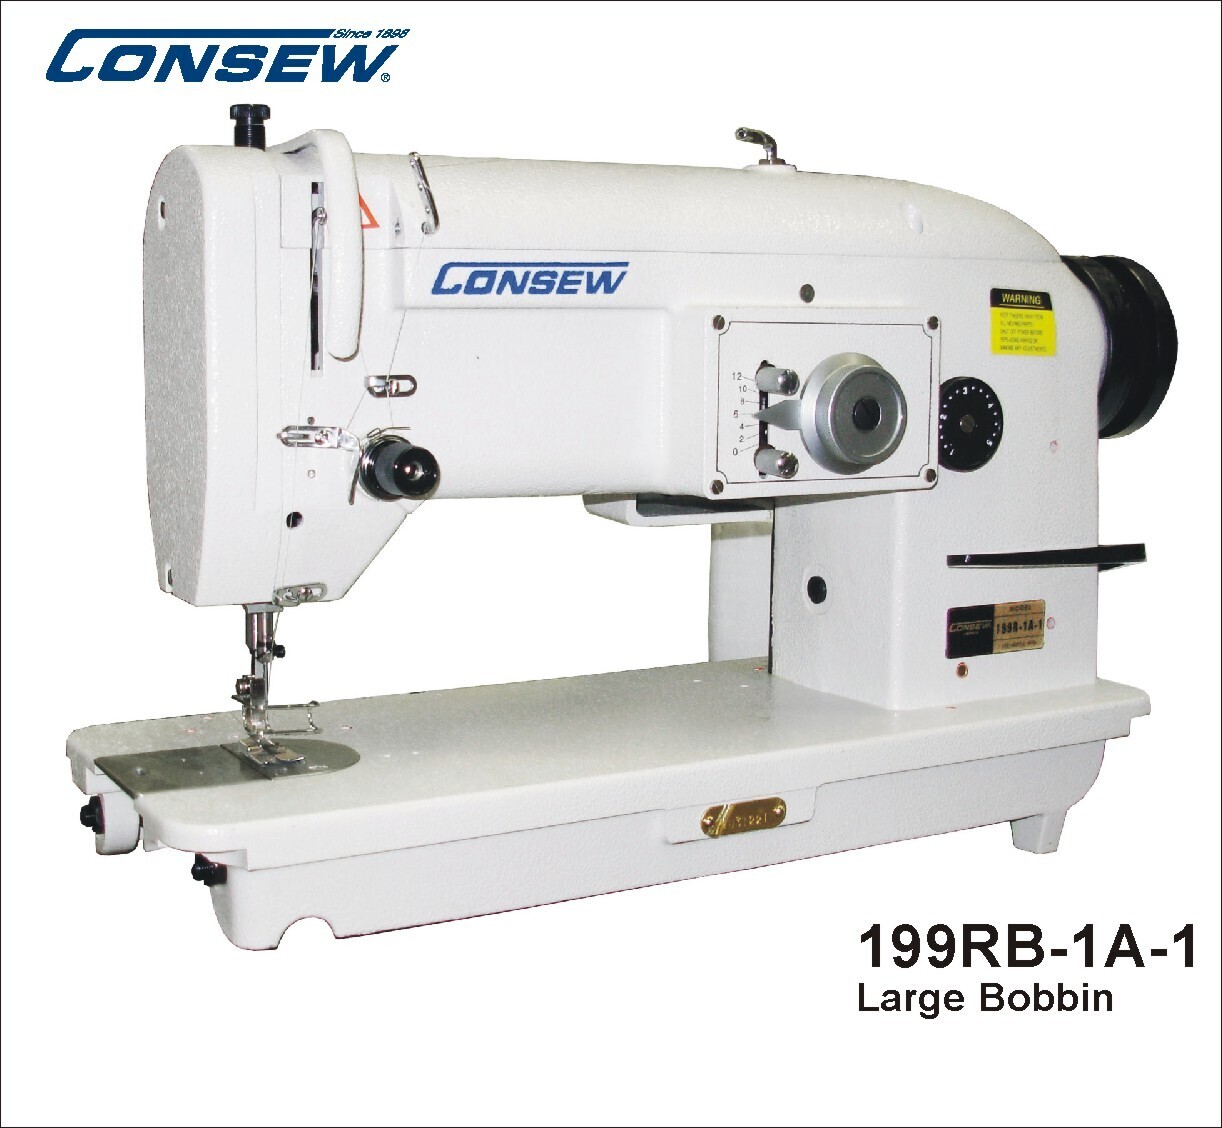 CONSEW Model 199RB-1A-1 / 199RB-2A-1 / 199RB-3A-1